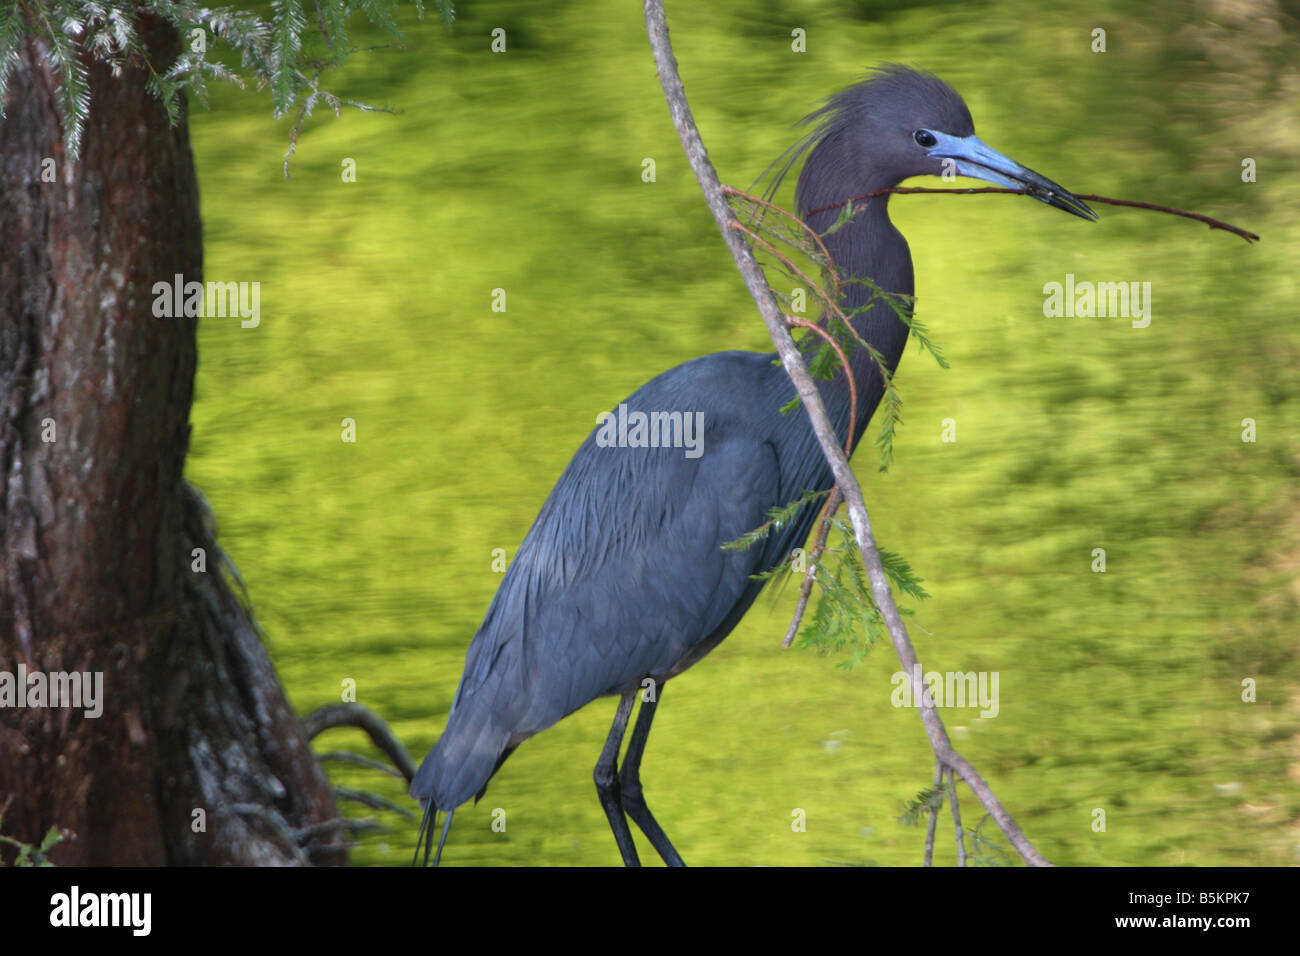 stock photo of a little blue heron collecting sticks Stock Photo